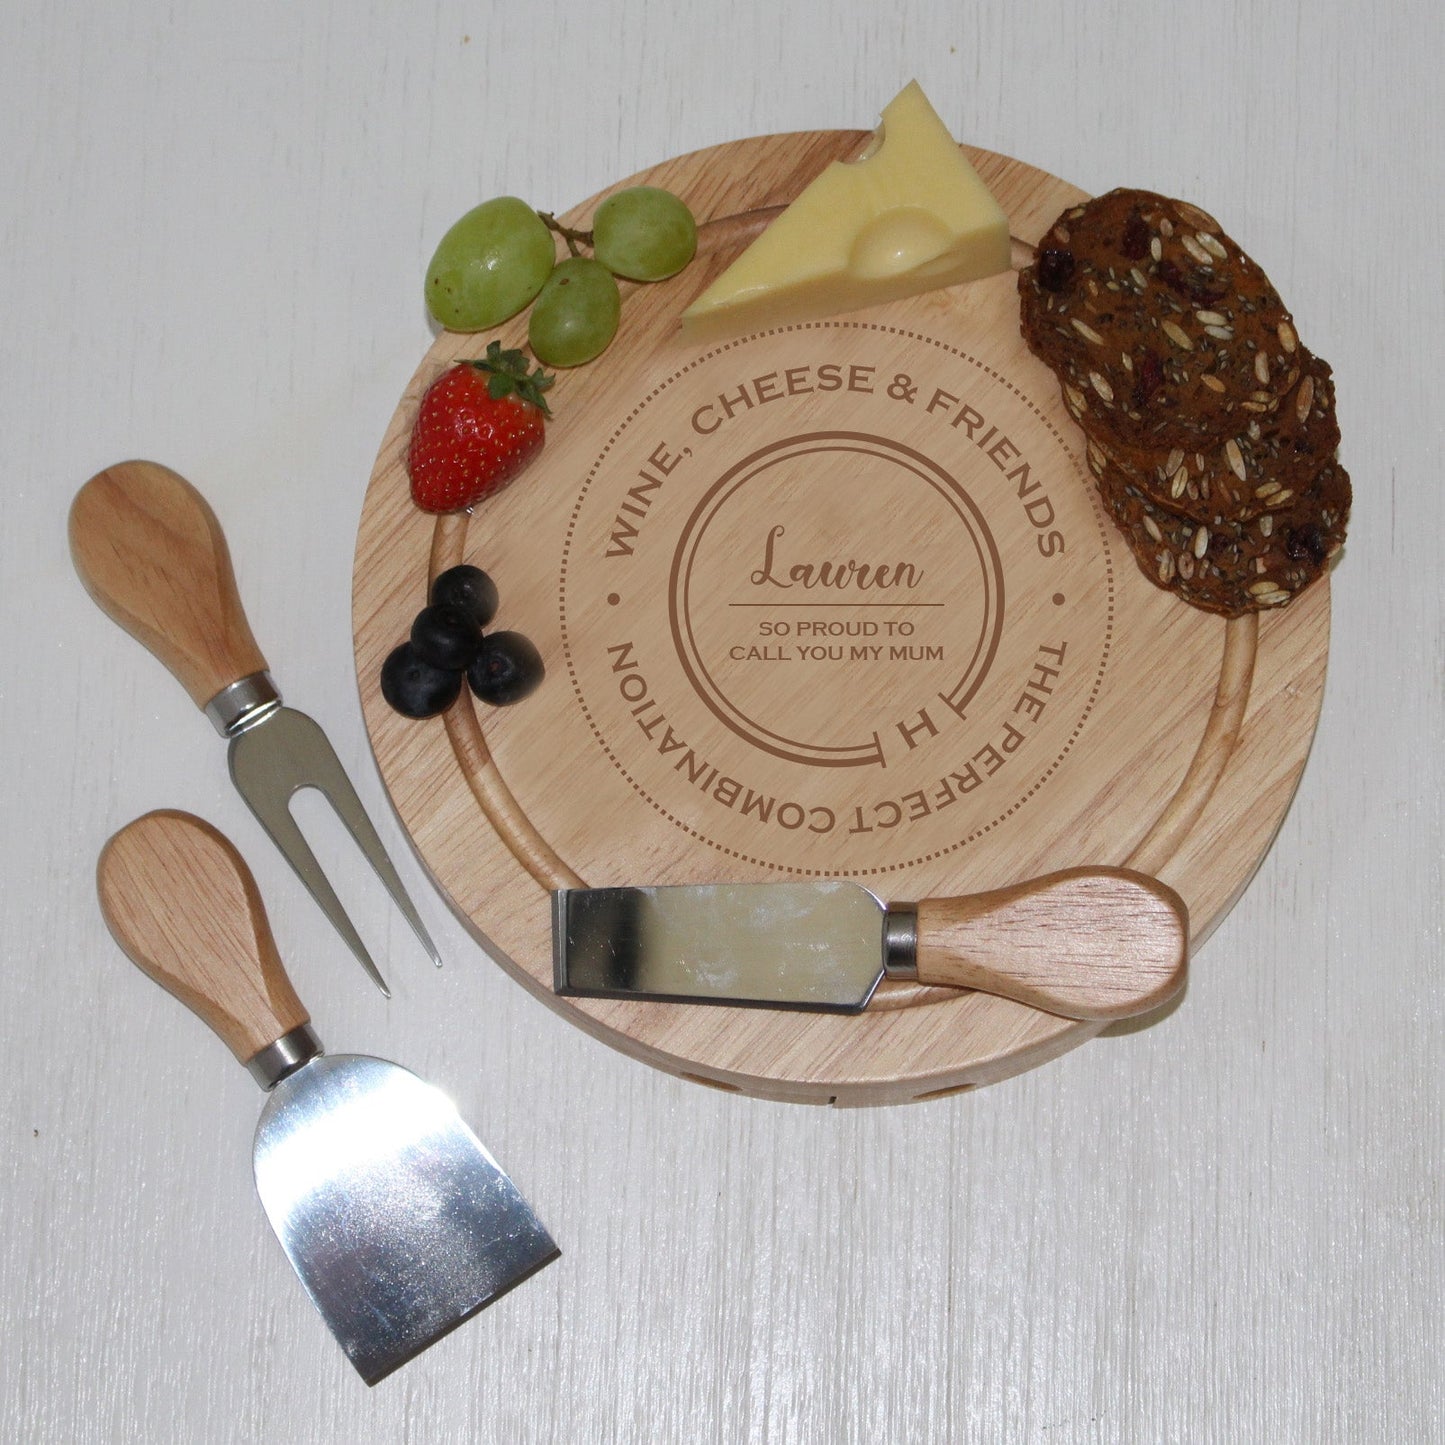 The Gippsland Cheese Board with Knife Set